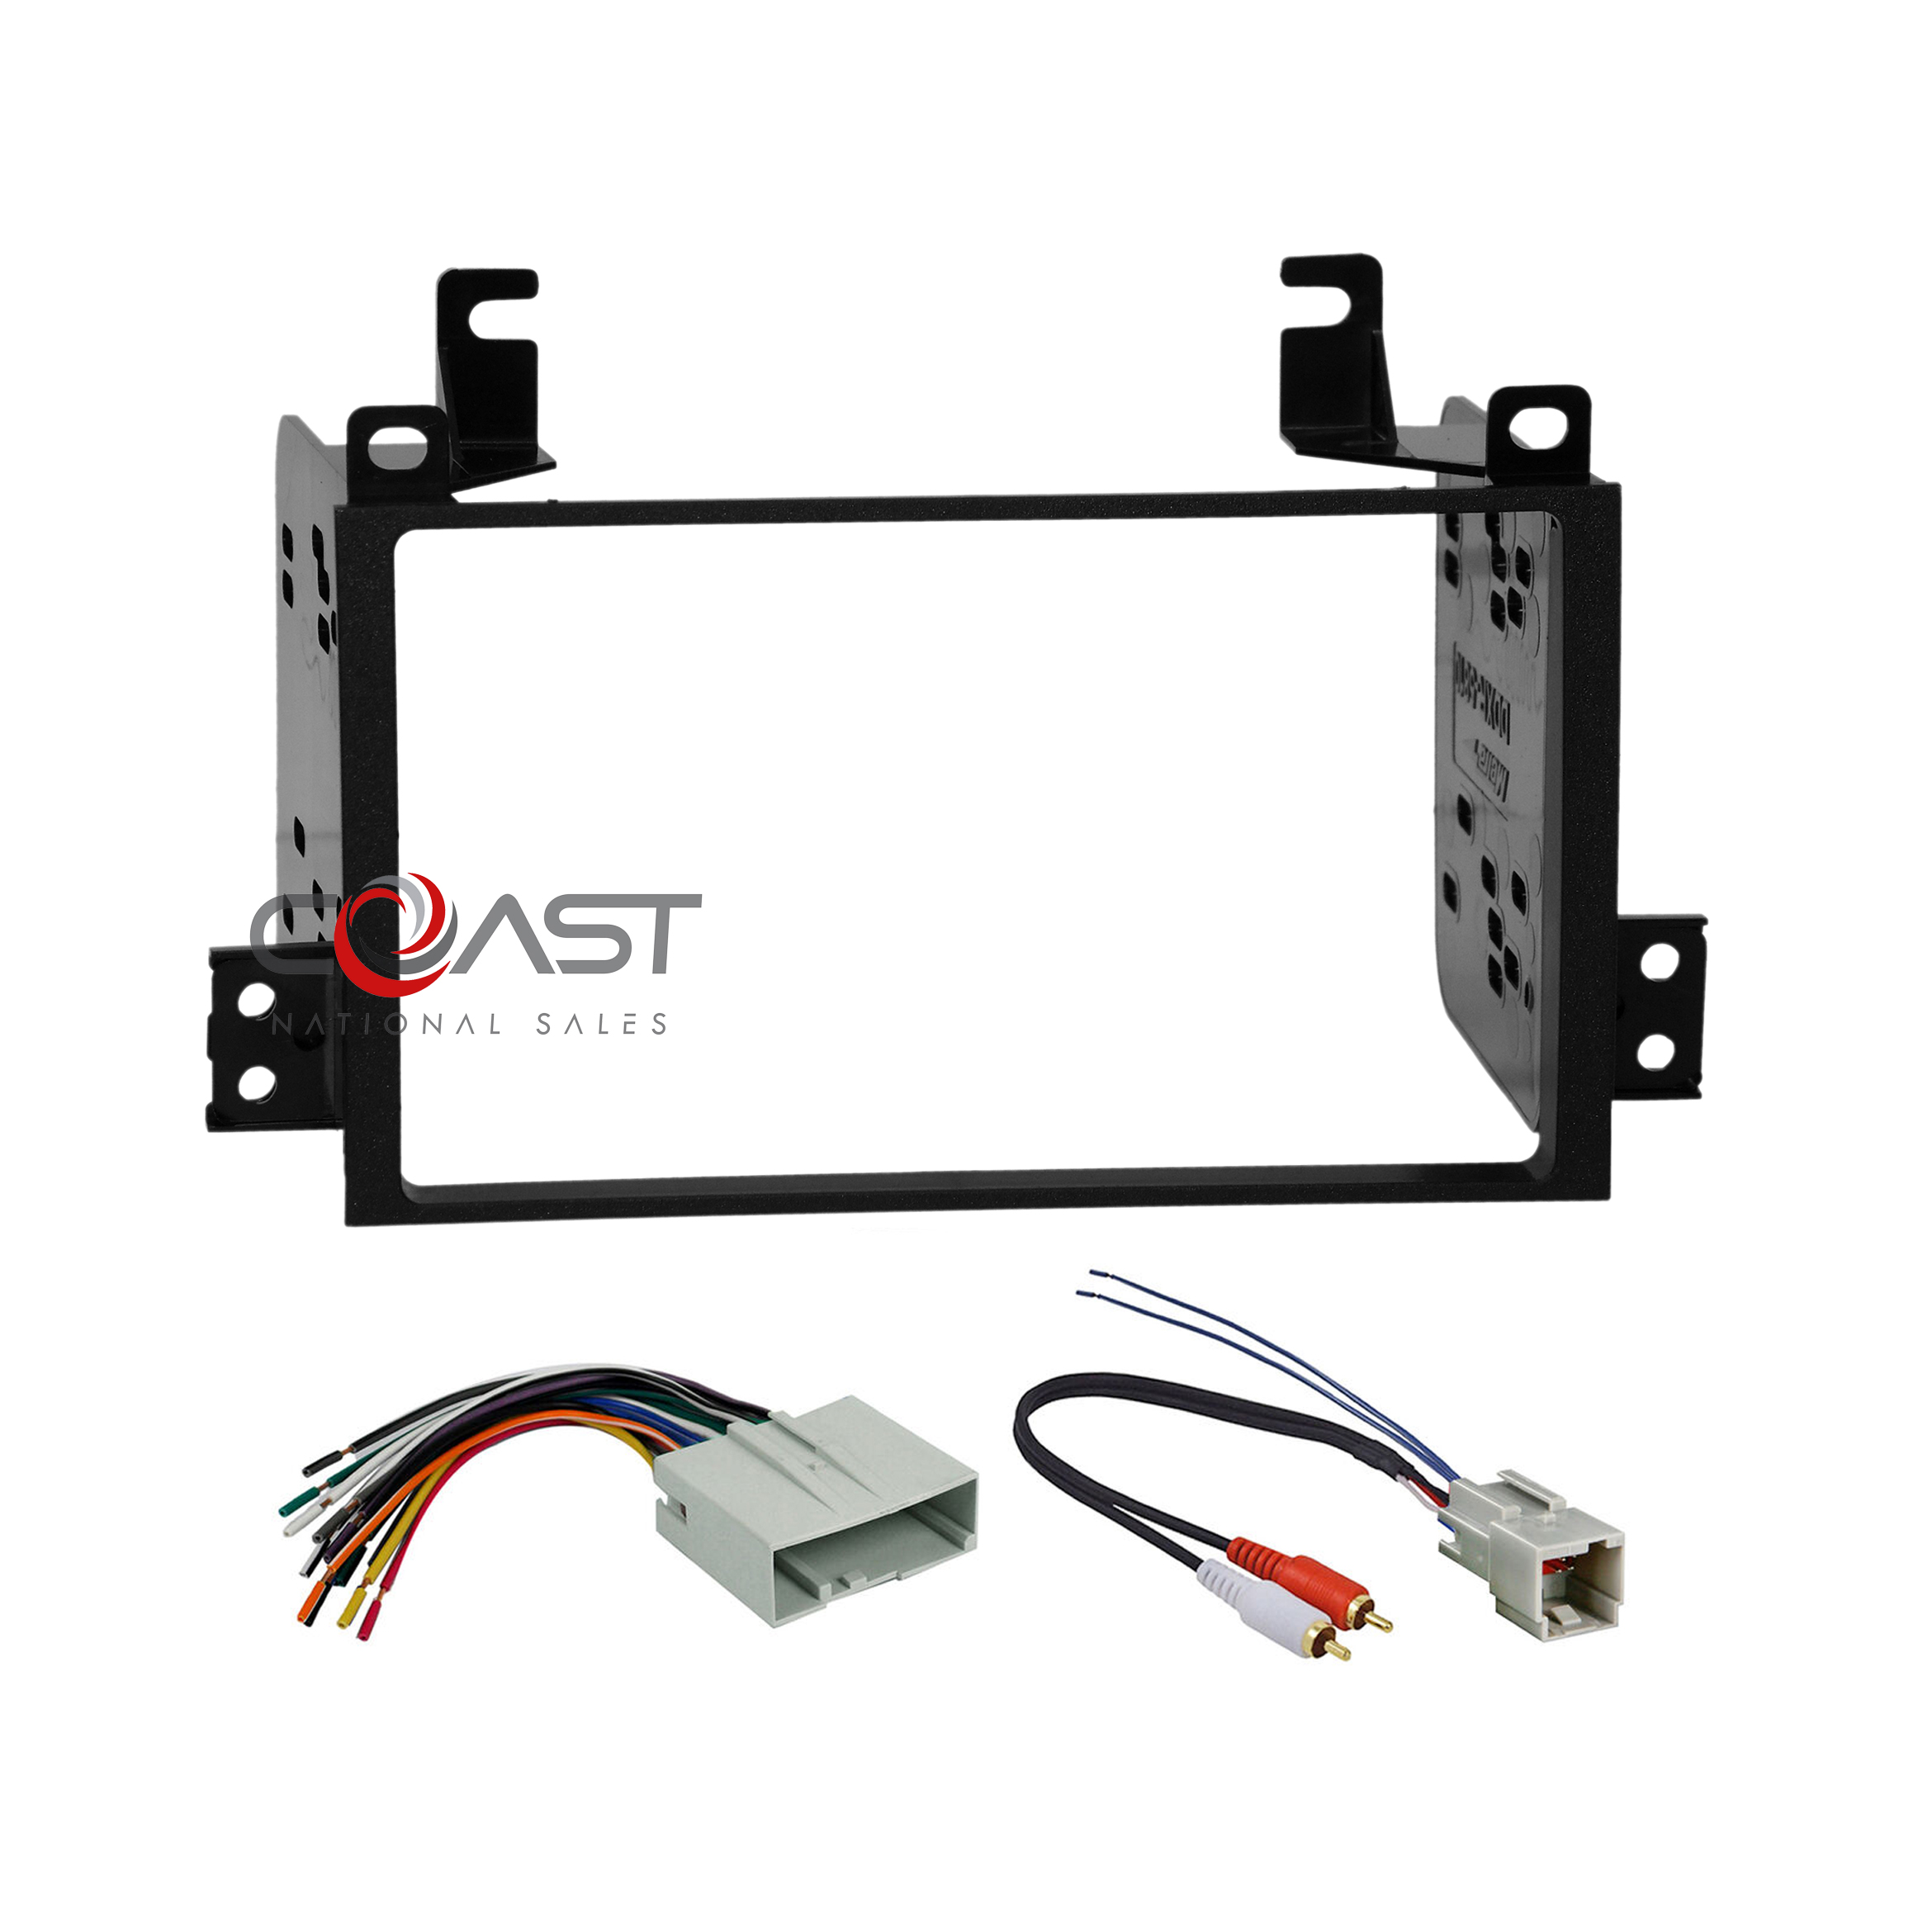 Lincoln Town Car Radio Wiring Harness from coastnationalsales.com